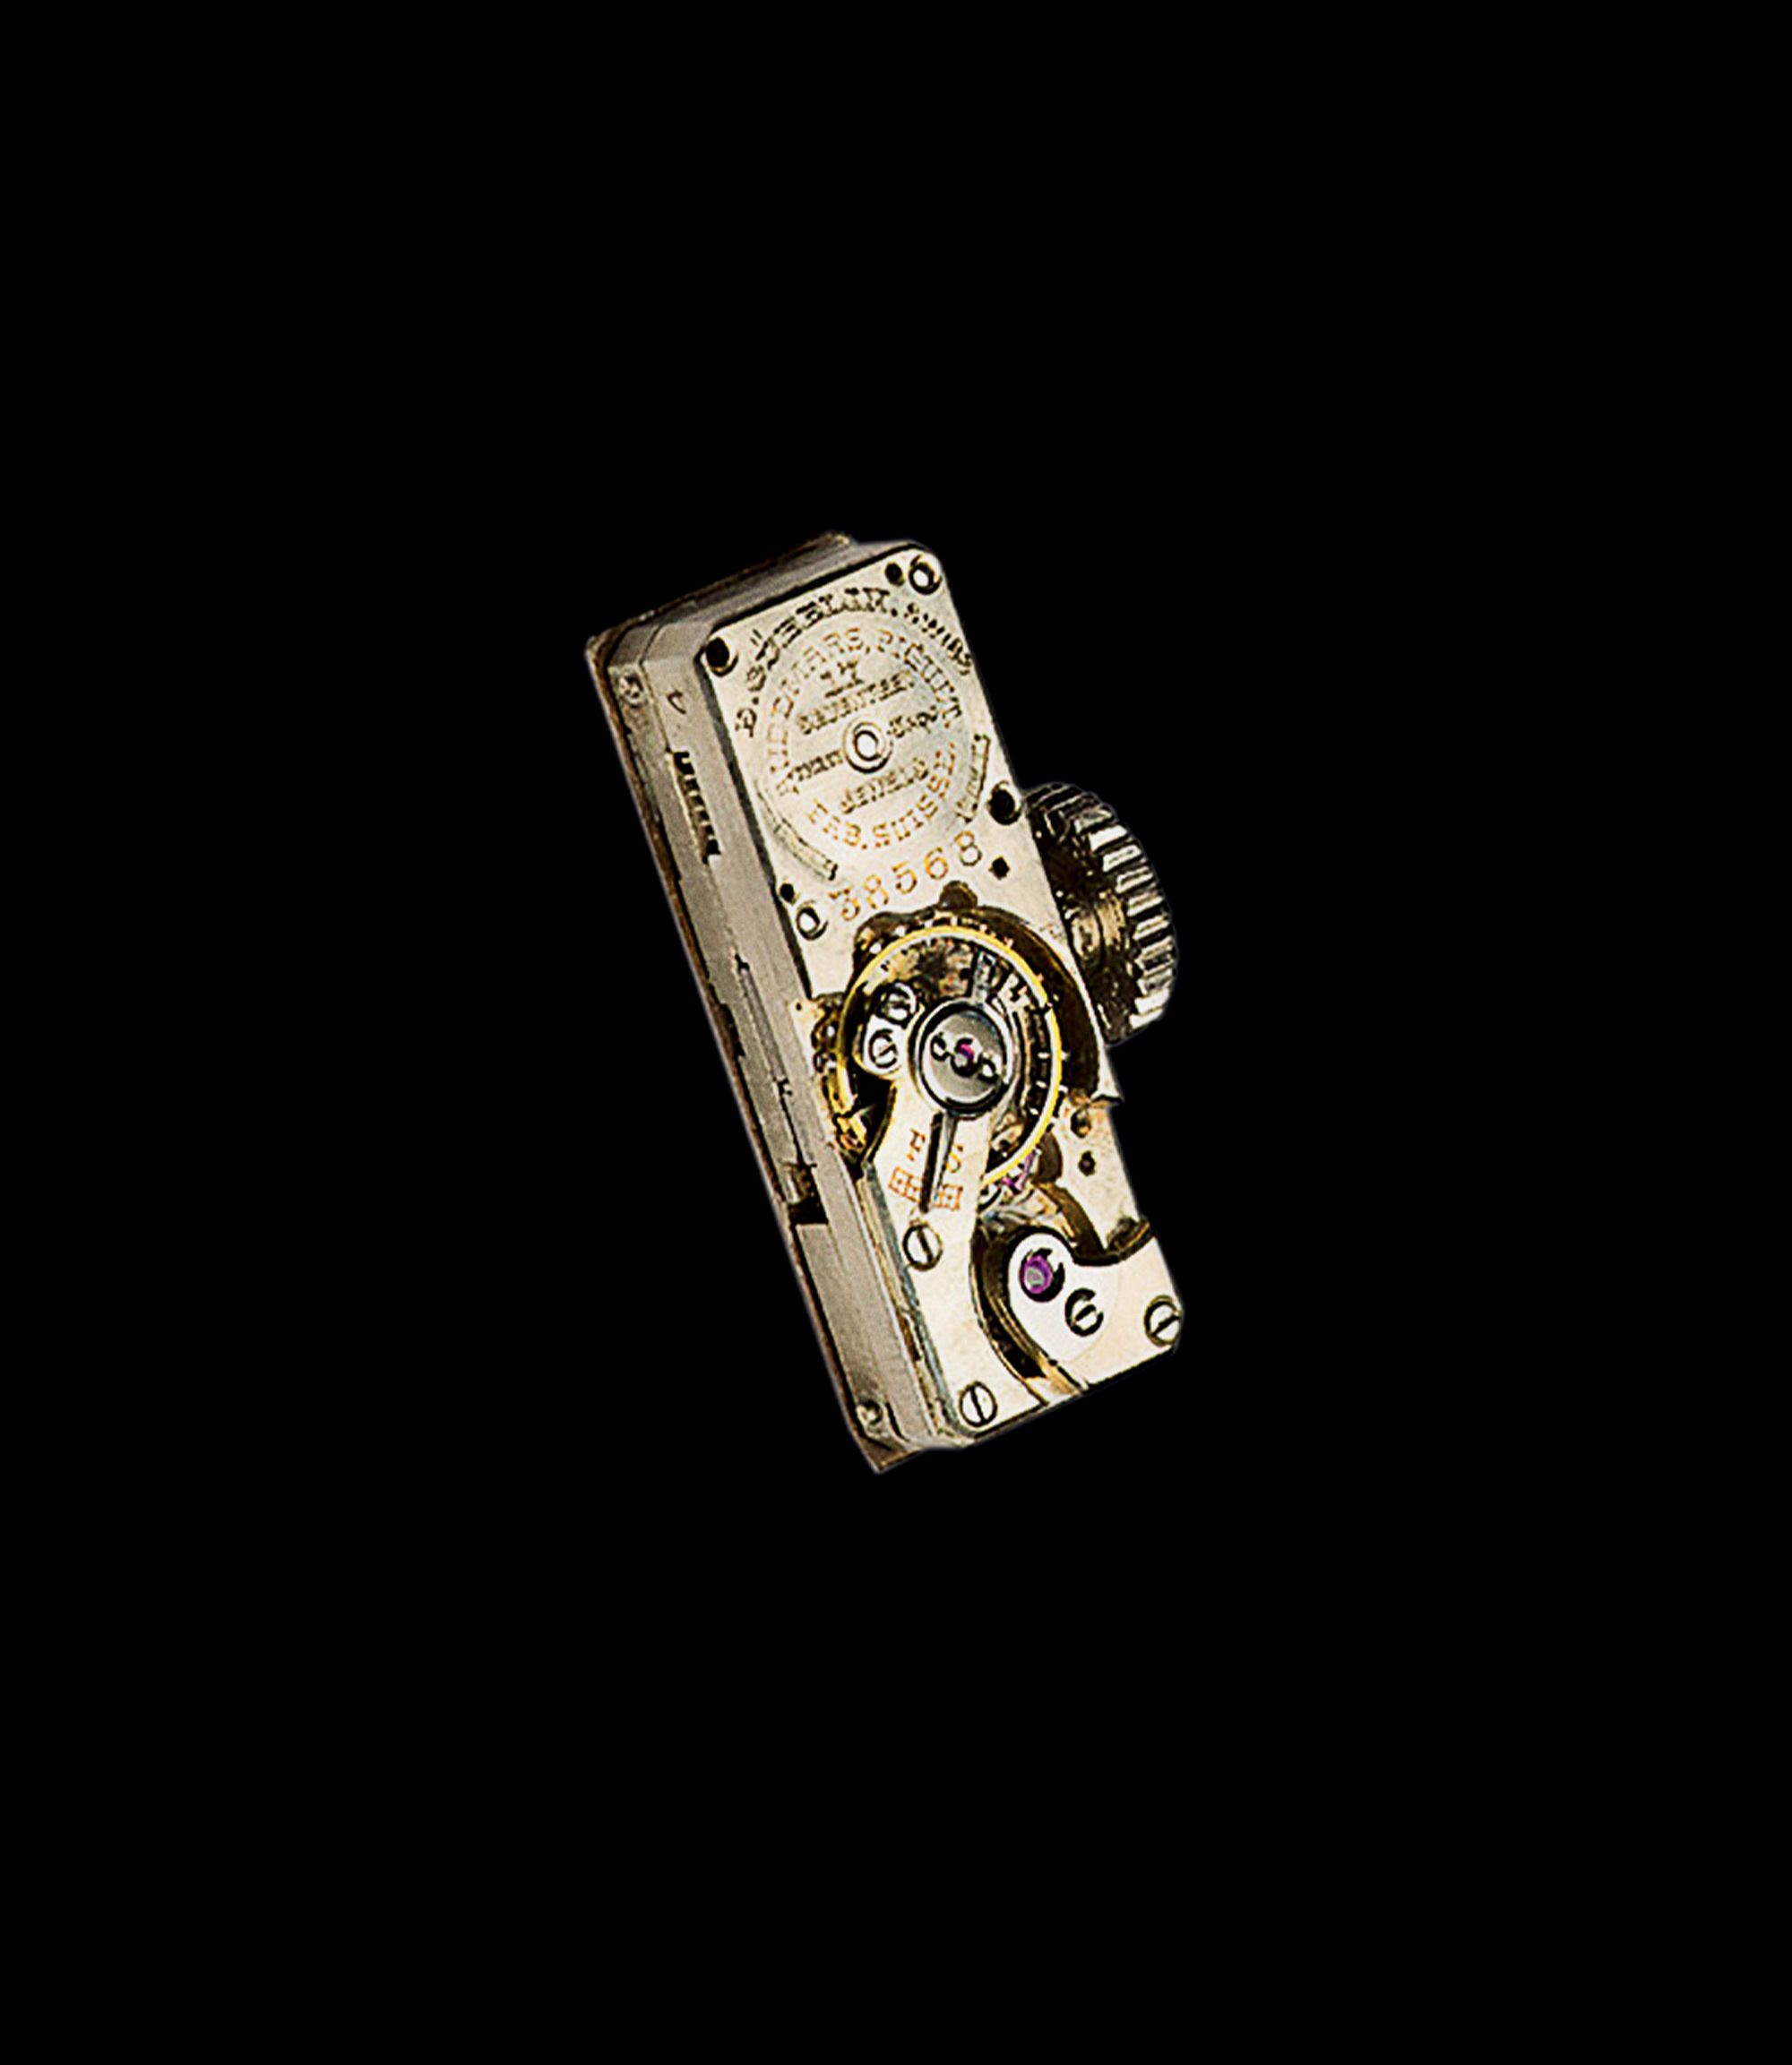 Calibre 5/7 SB. In 1927, this Audemars Piguet mechanism set a record for its diminutive size of just 15.9 x 5.8 x 3.3 mm. Two years later, Le Coultre & Cie went even further with the now famous Calibre 101 (14 x 4.8 x 3.4 mm). Audemars Piguet Heritage.